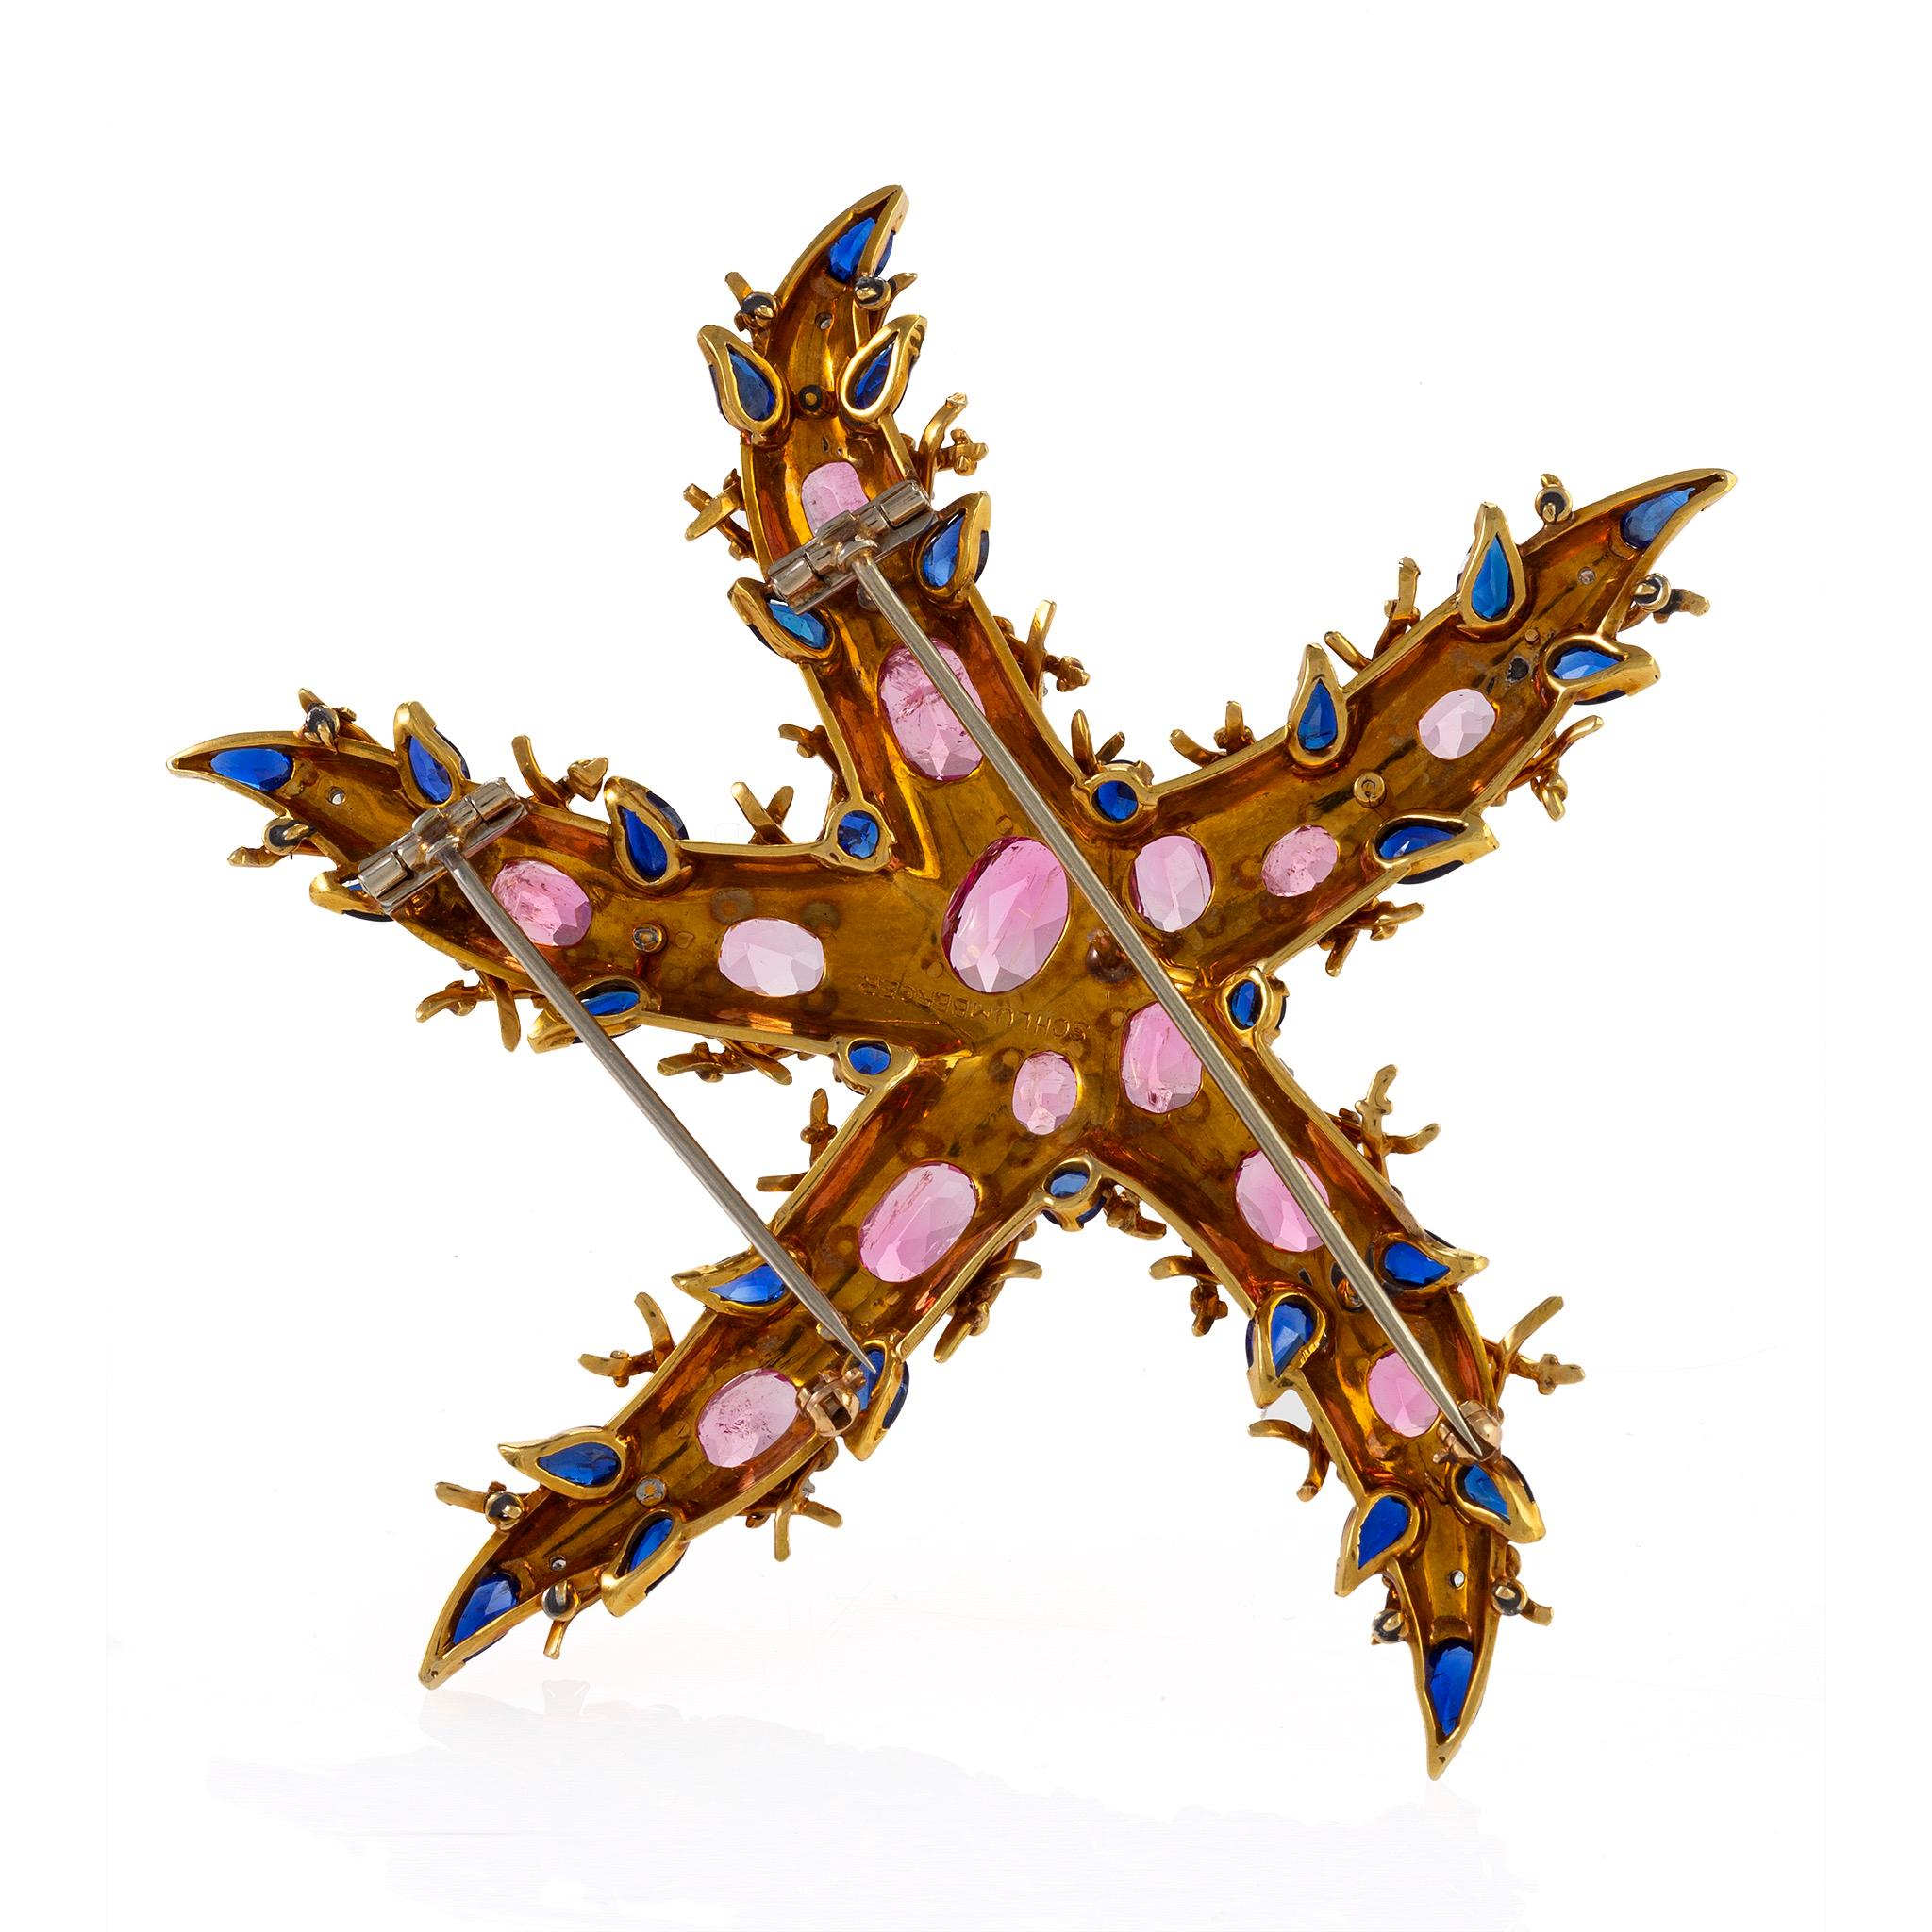 This dramatically oversized gemmy starfish brooch set with pink tourmalines, sapphires, and diamonds, mounted in gold and platinum, was designed by Jean Schlumberger and dates from the mid 1940s, when Schlumberger, just arrived to New York from